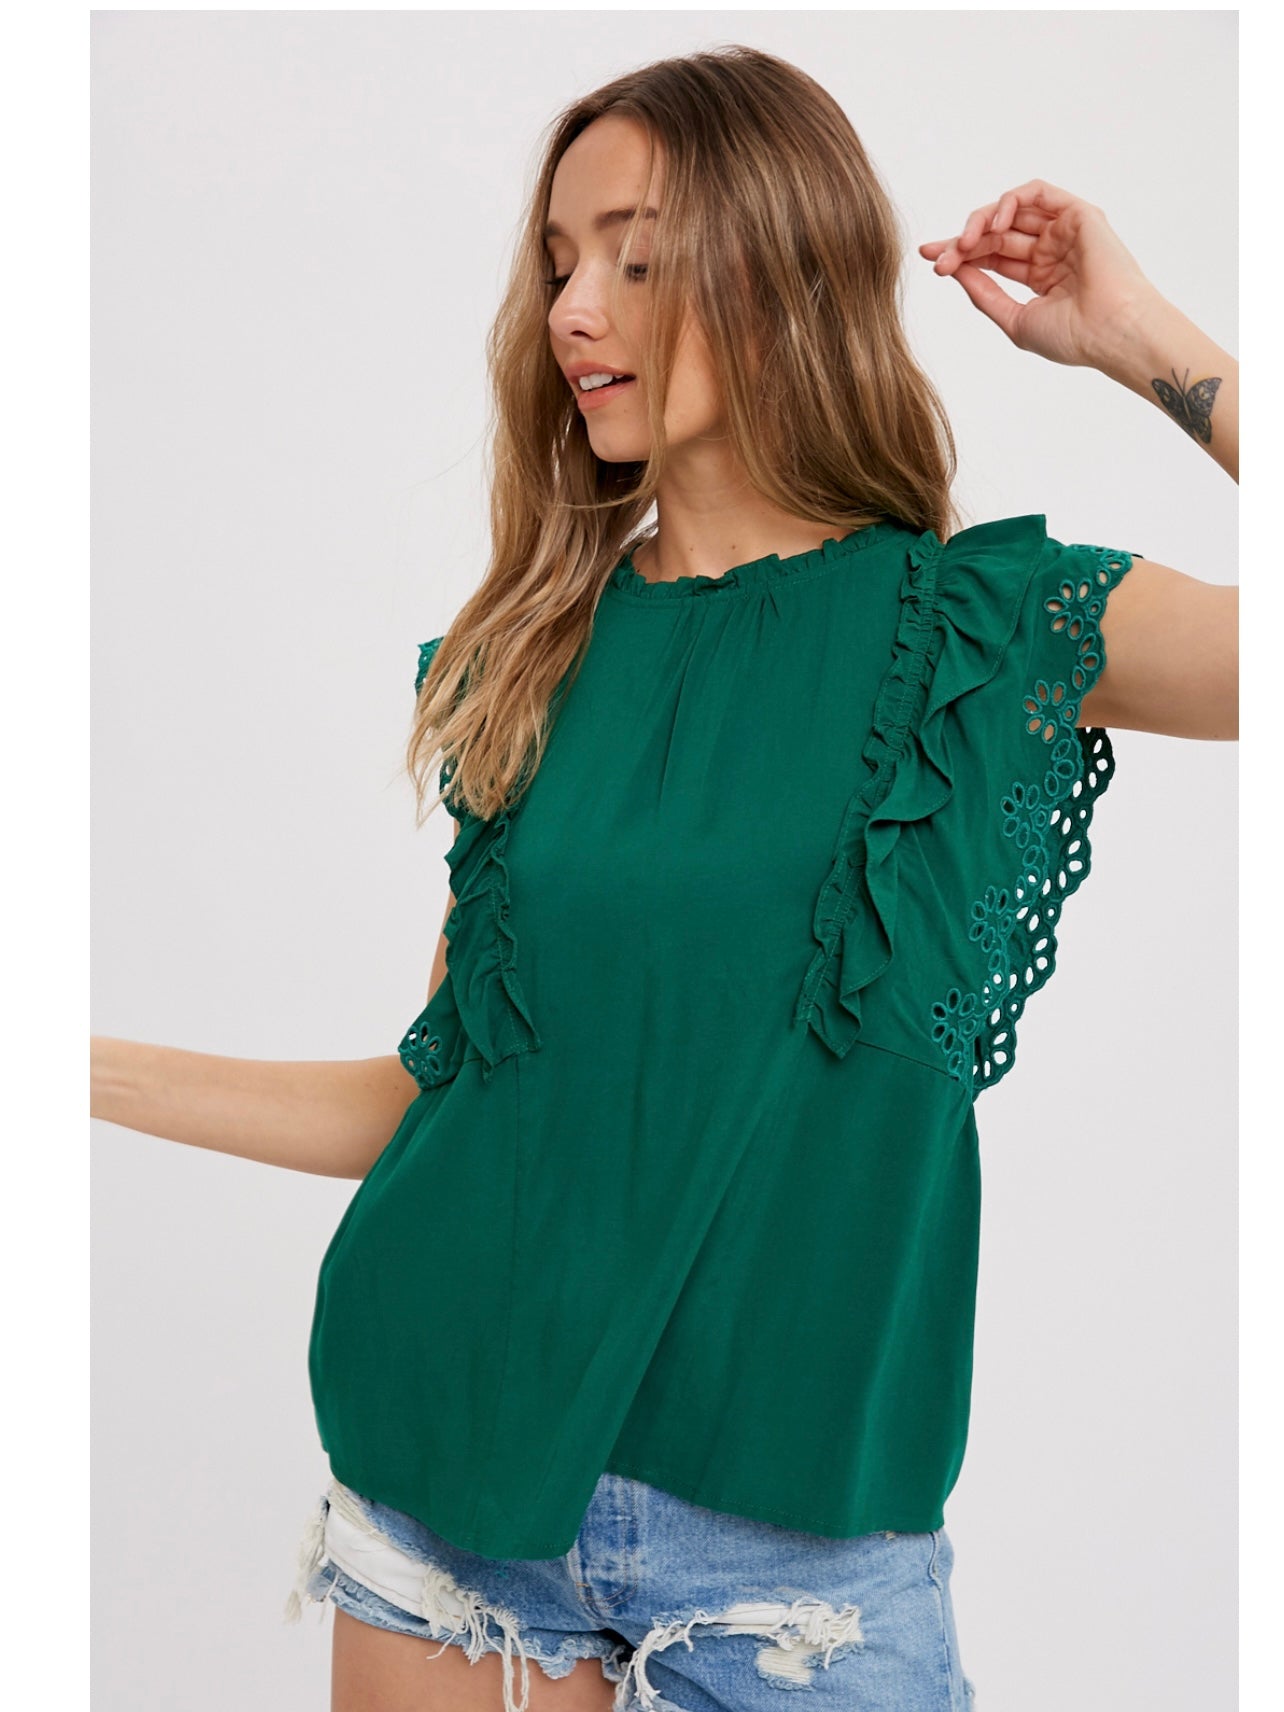 Ruffled Eyelet Lace Blouse in Forest